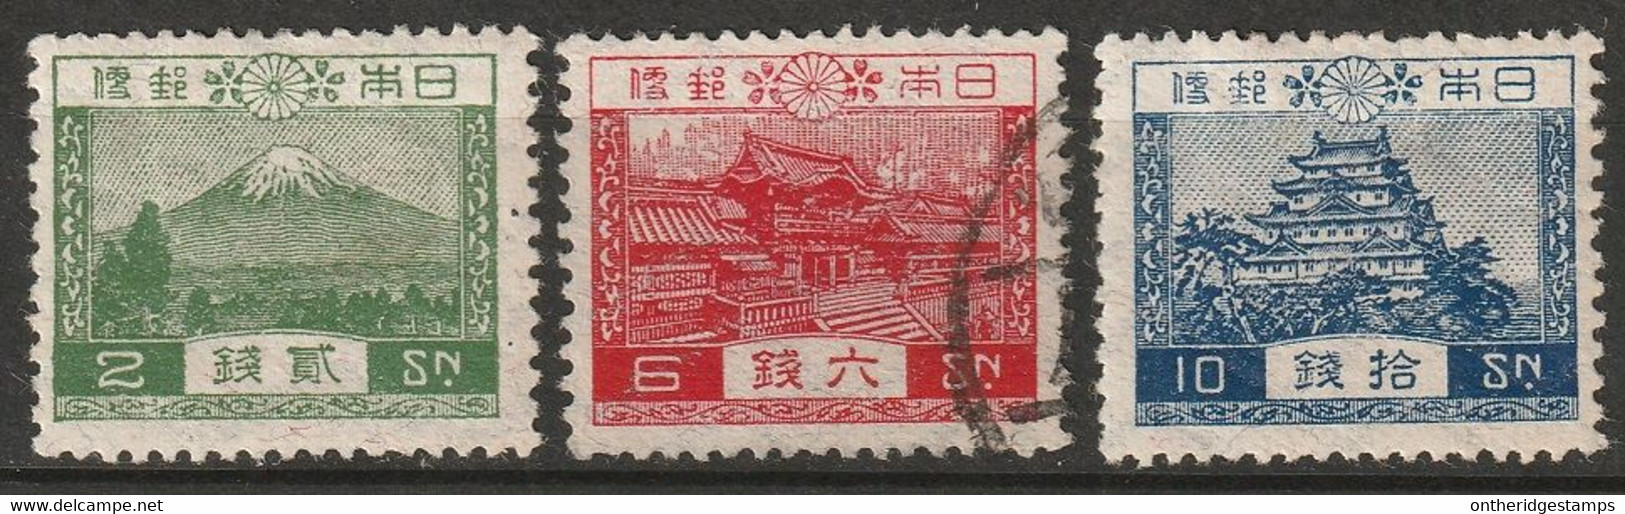 Japan 1926 Sc 194-6 Partial Set MH*/used - Unused Stamps